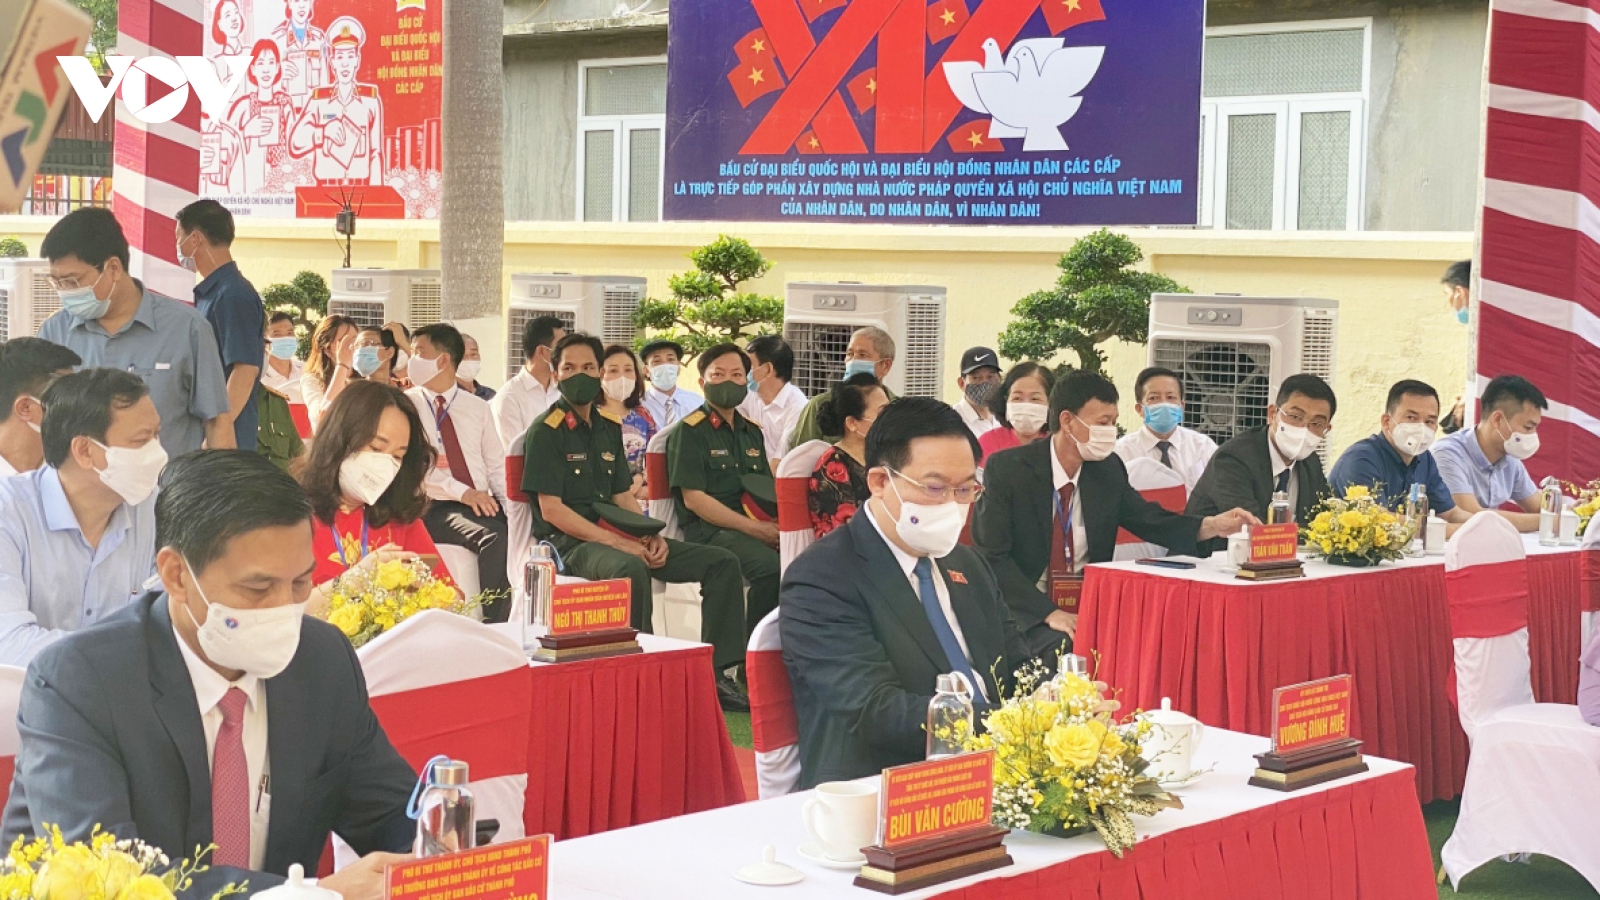 National election day begins in Vietnam